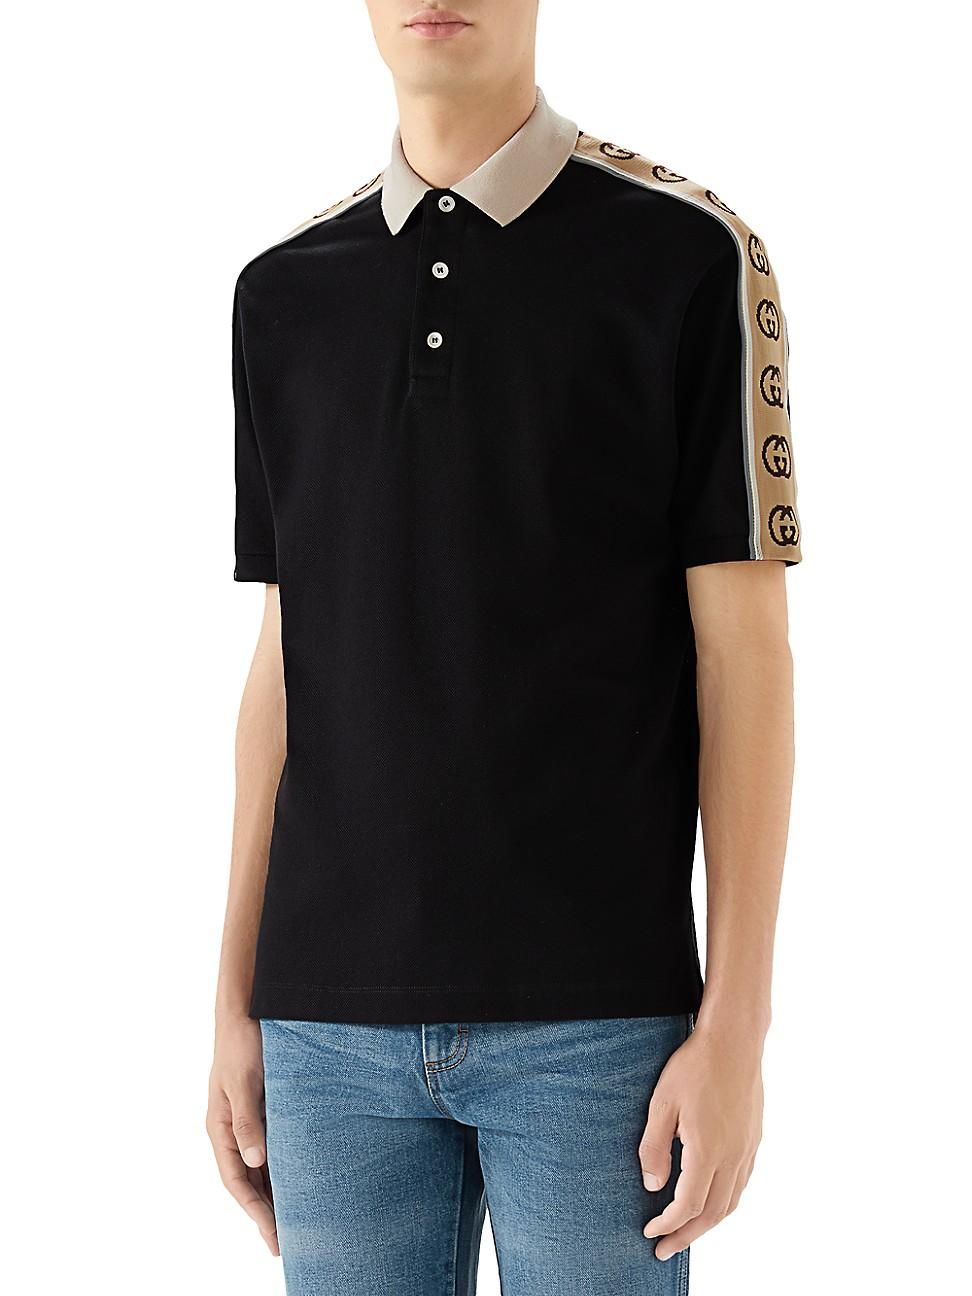 Gucci GG Embroidered Stretch-cotton Polo Shirt in Black for Men - Save 44%  - Lyst